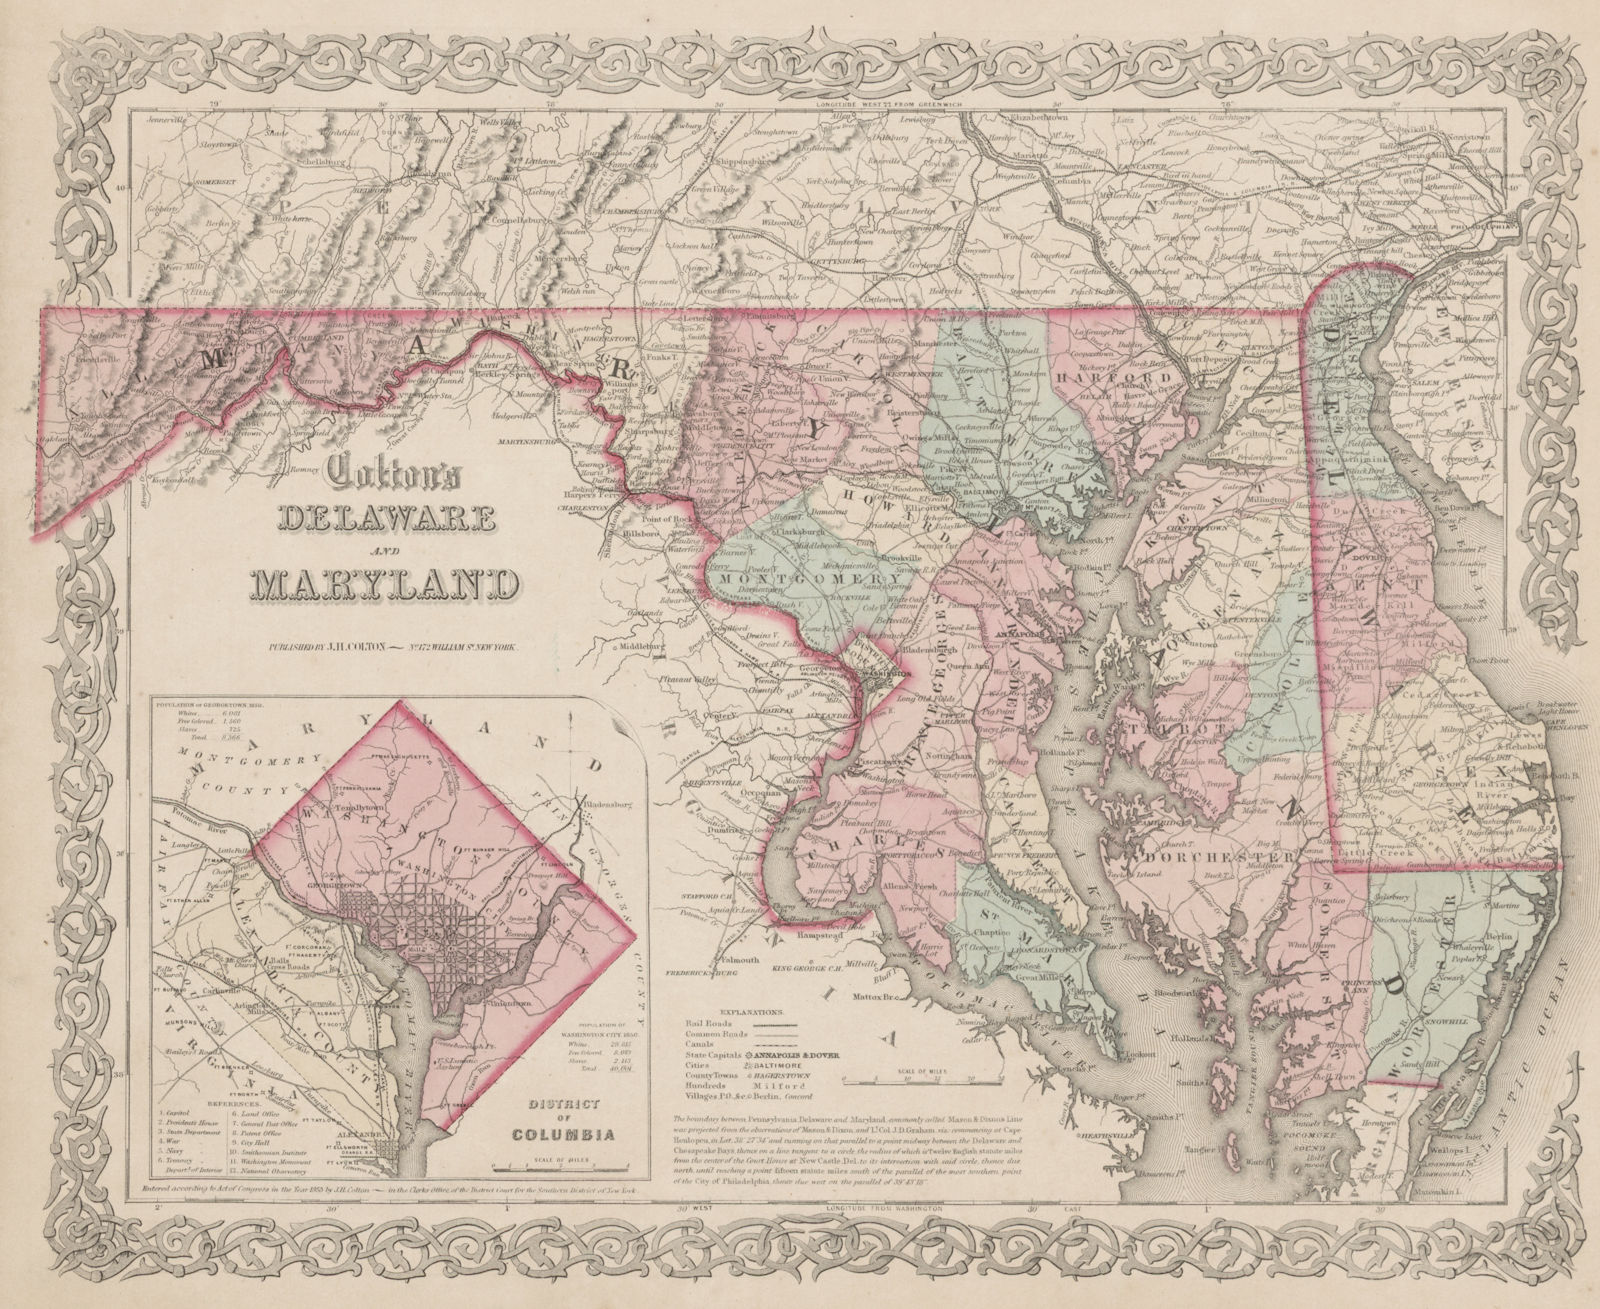 Associate Product "Colton's Delaware and Maryland". District of Columbia. US state map 1863